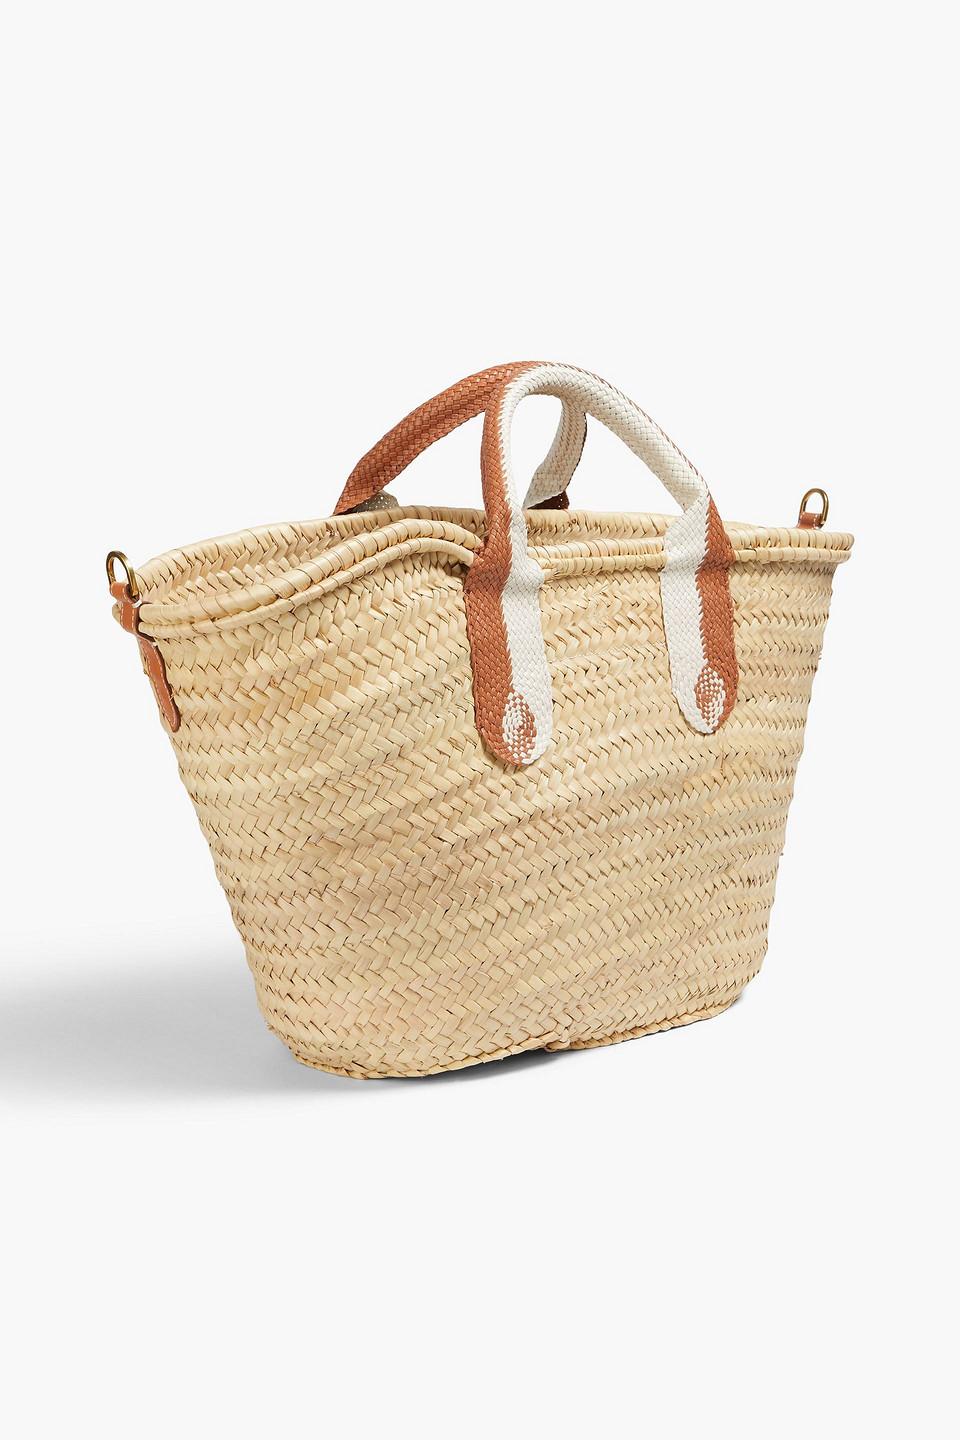 Zimmermann Straw Tote in Natural | Lyst